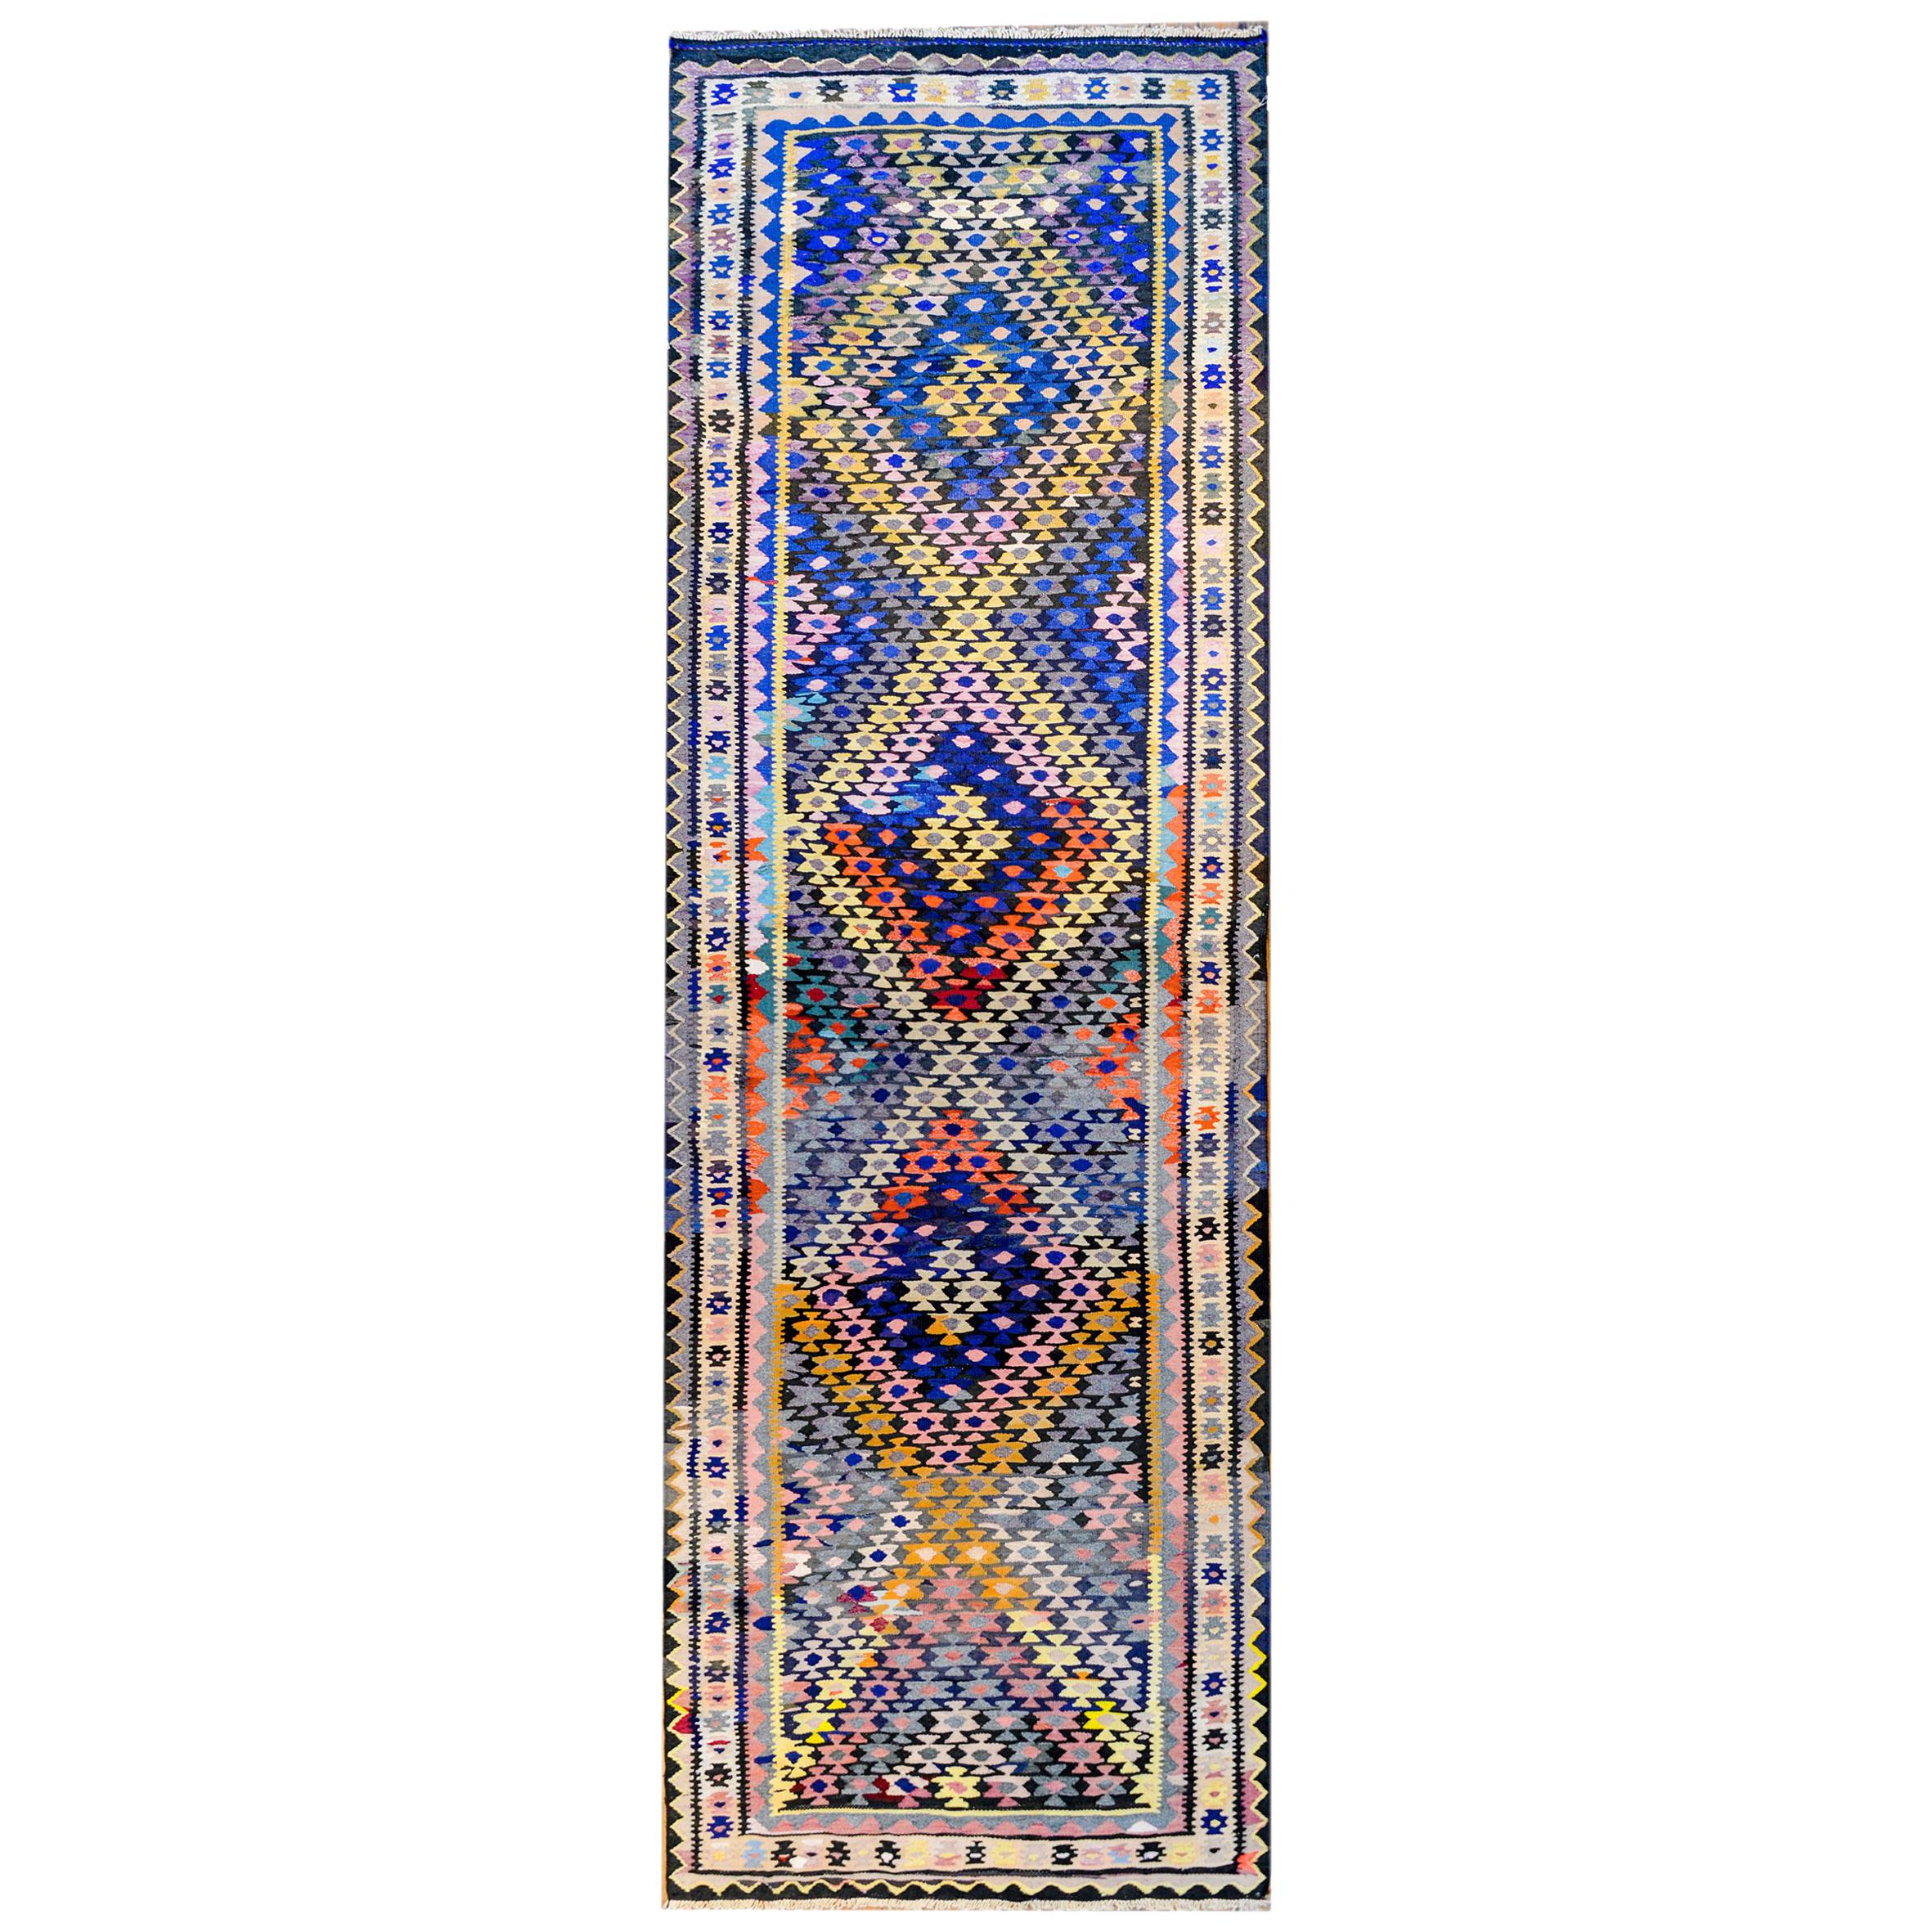 Early 20th Century Qazvin Kilim Rug For Sale